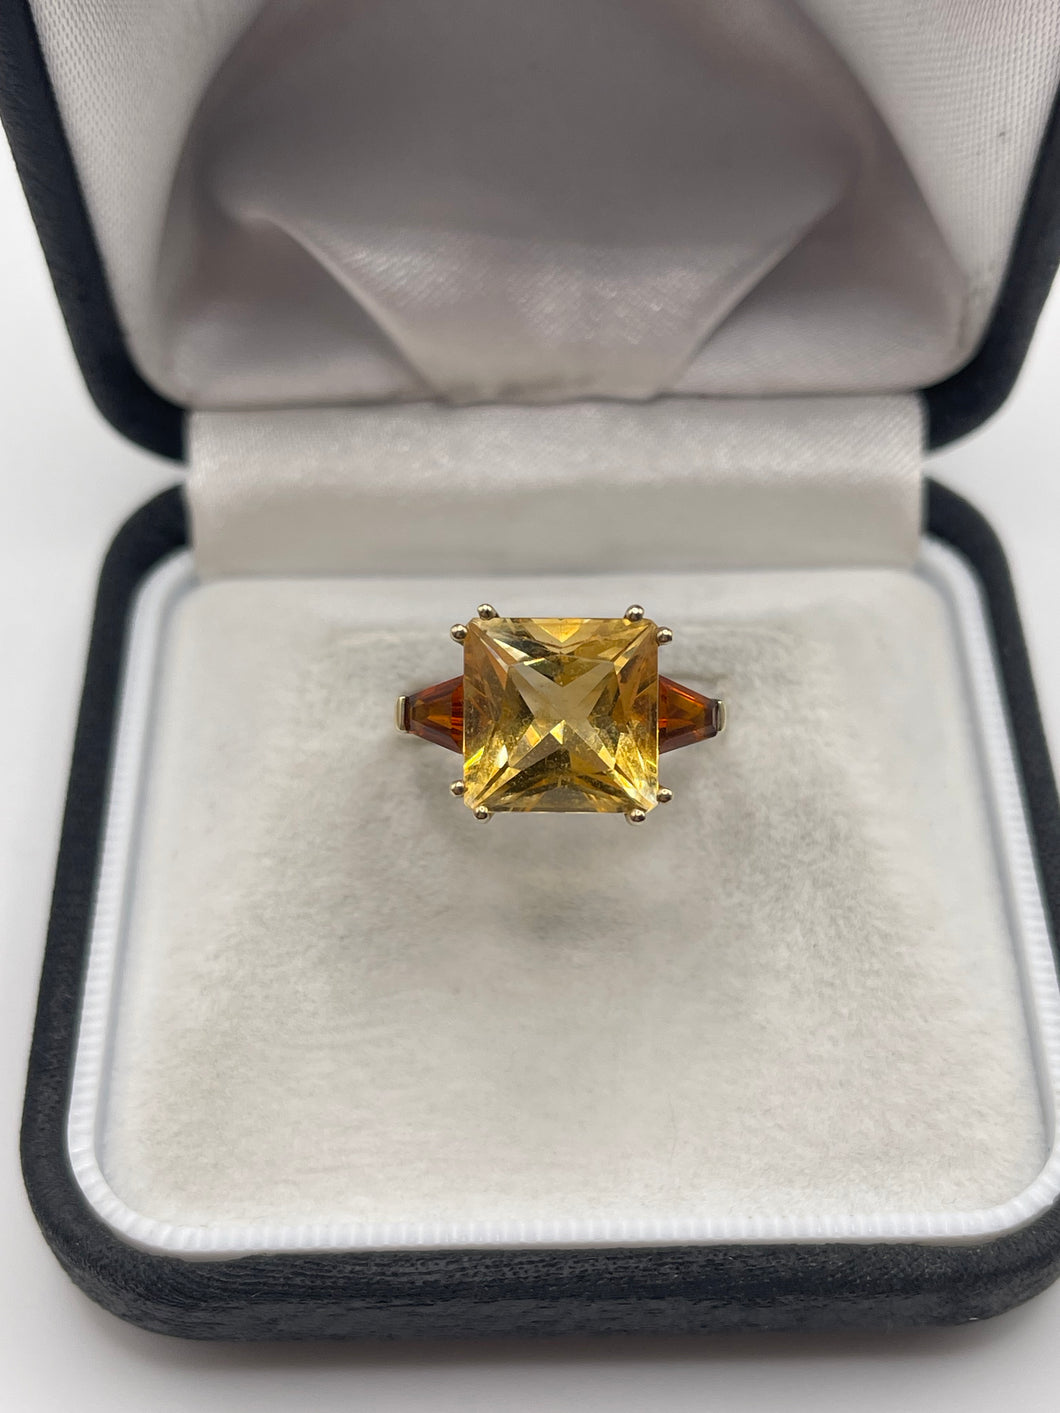 9ct gold citrine and garnet ring